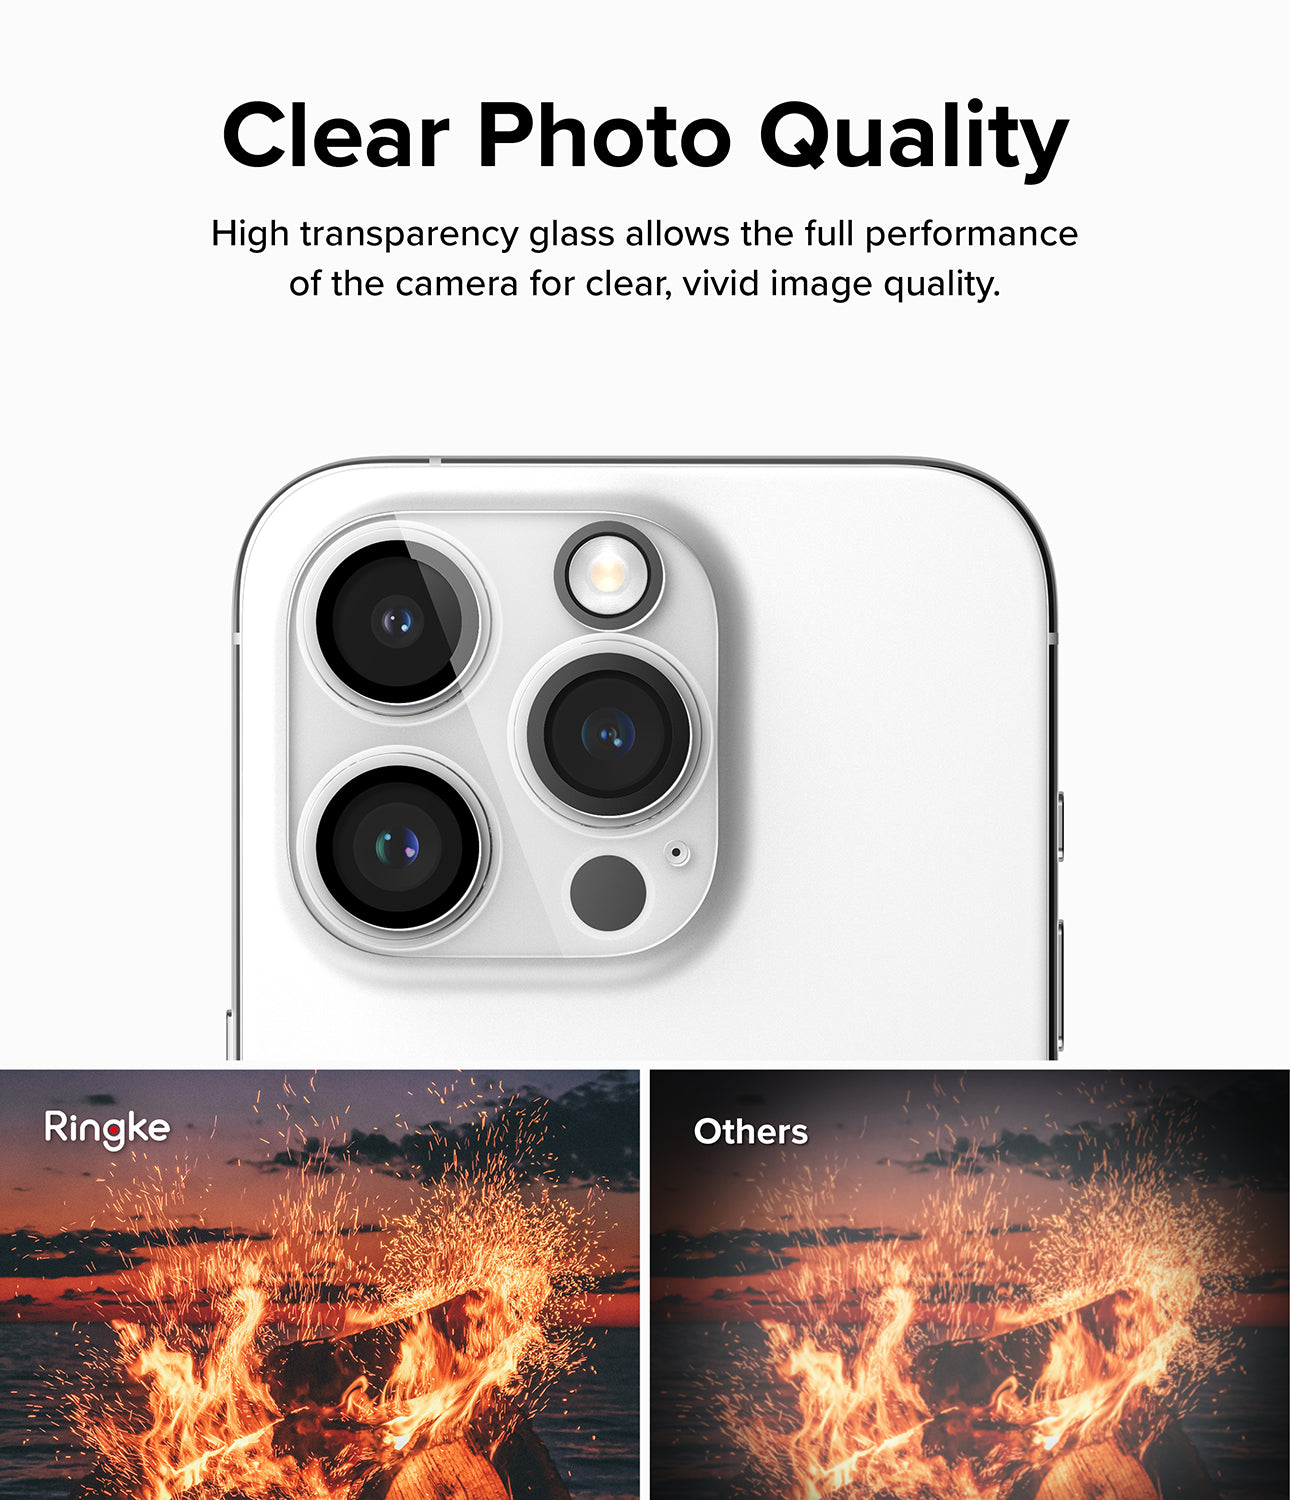 iPhone 15 Pro | Camera Protector Glass [2 Pack]- Clear Photo Quality. High transparency glass allows the full performance of the camera for clear, vivid image quality.